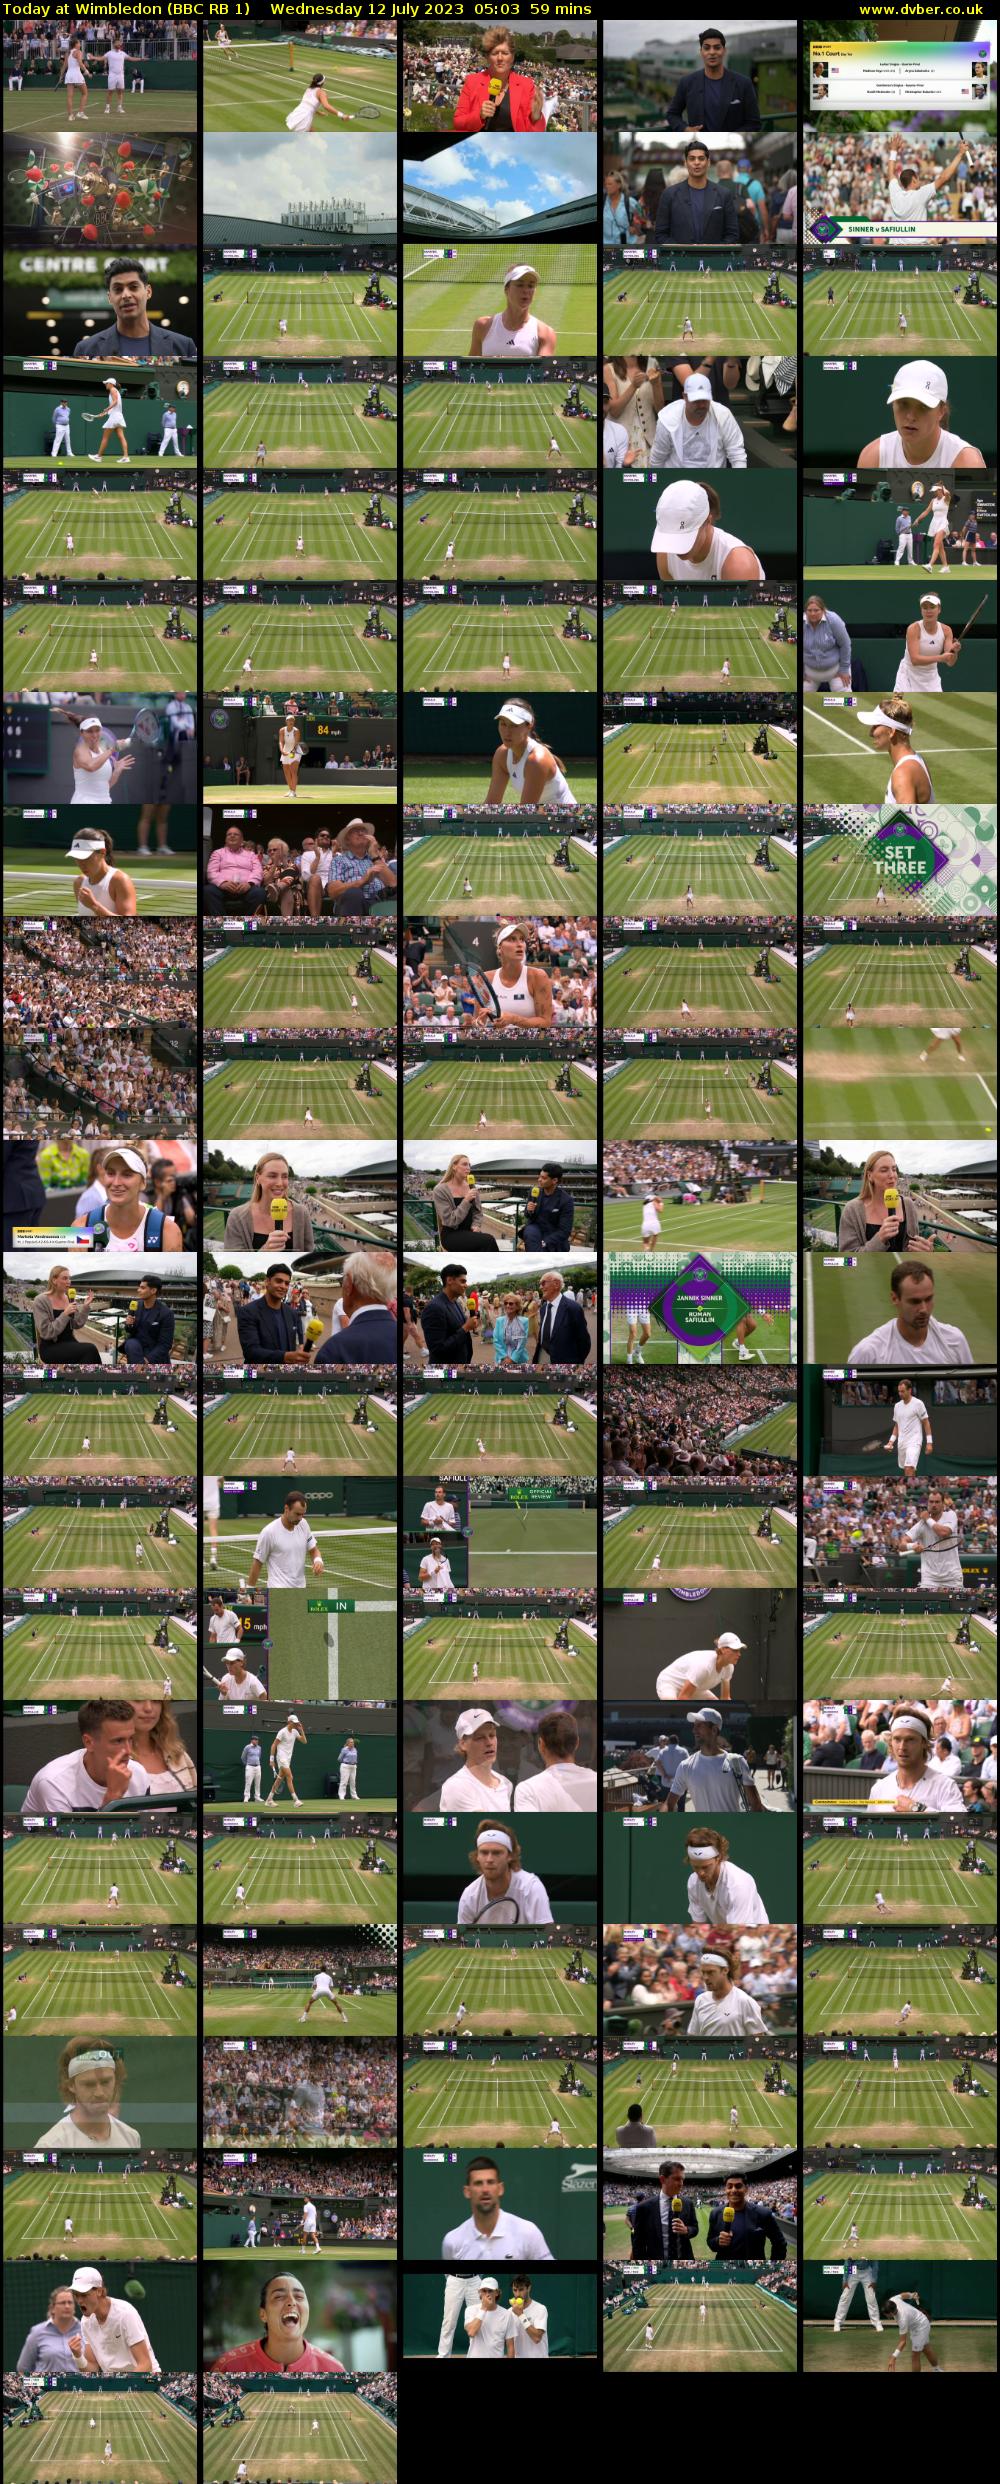 Today at Wimbledon (BBC RB 1) Wednesday 12 July 2023 05:03 - 06:02